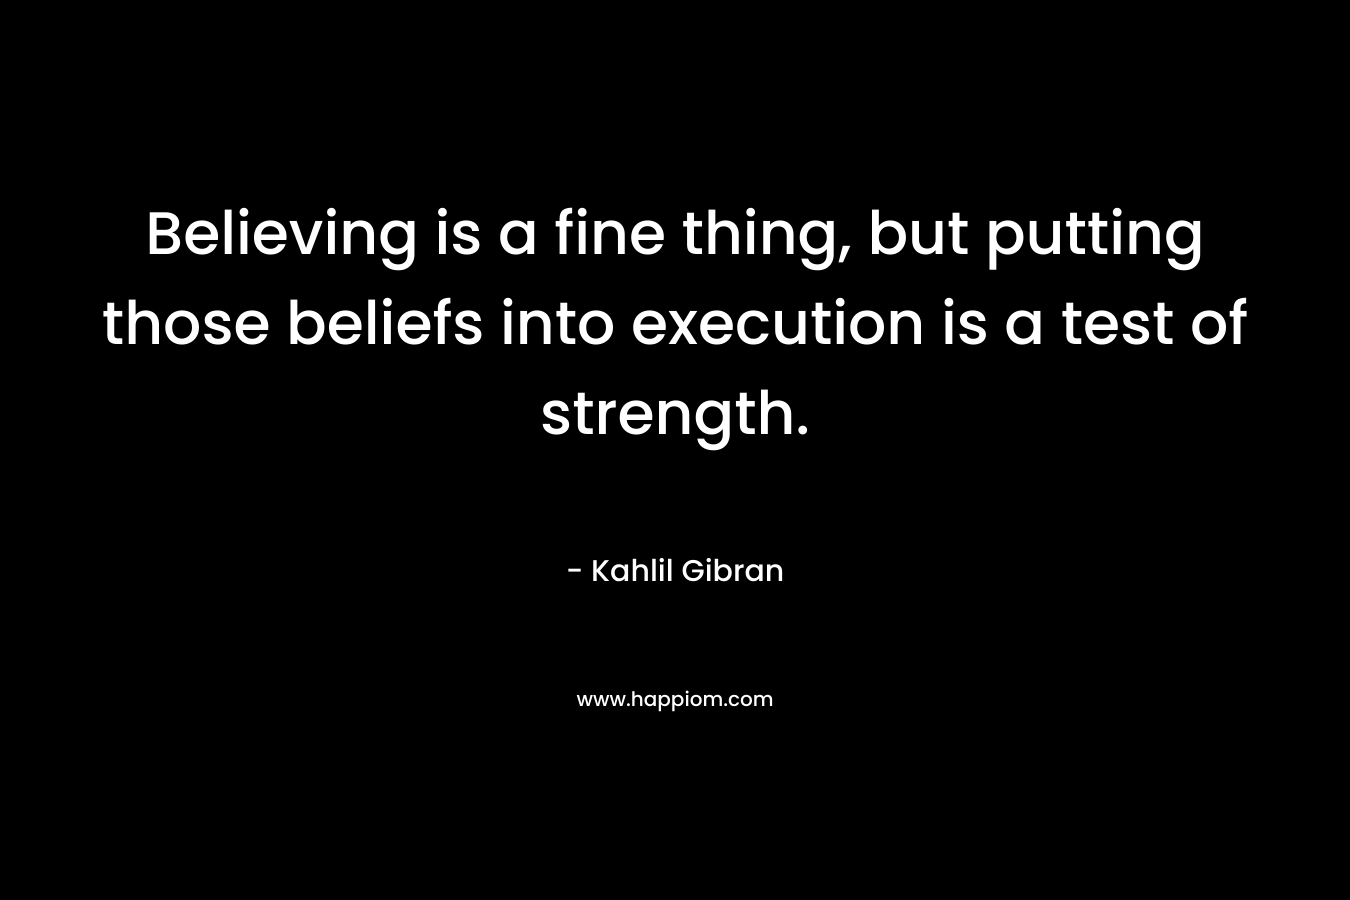 Believing is a fine thing, but putting those beliefs into execution is a test of strength.